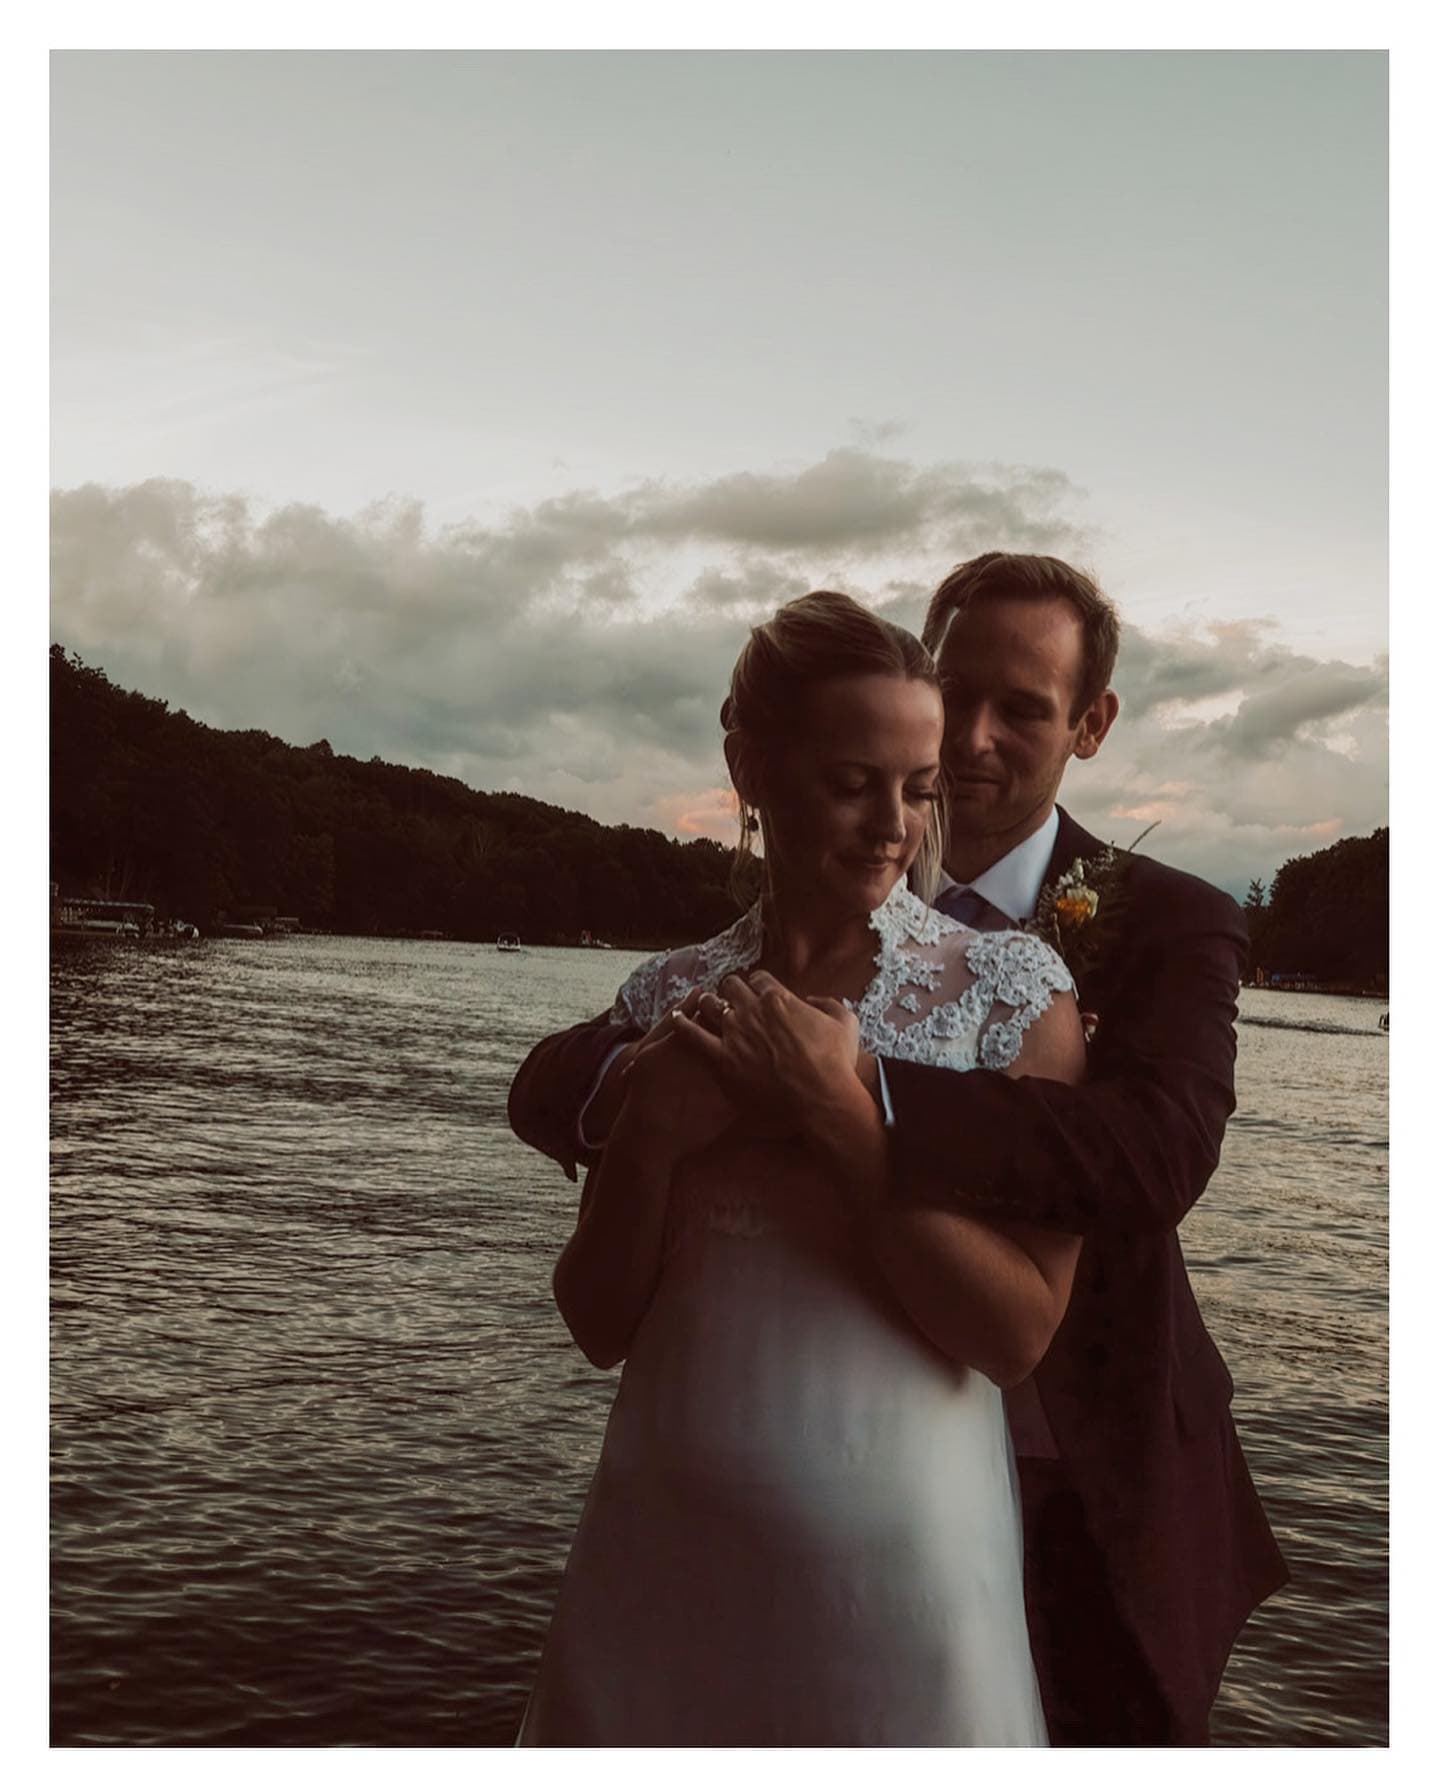 A Vintage Wedding at the Allen Family Cottage: A Tale of Love, Tradition, and Unexpected Joy